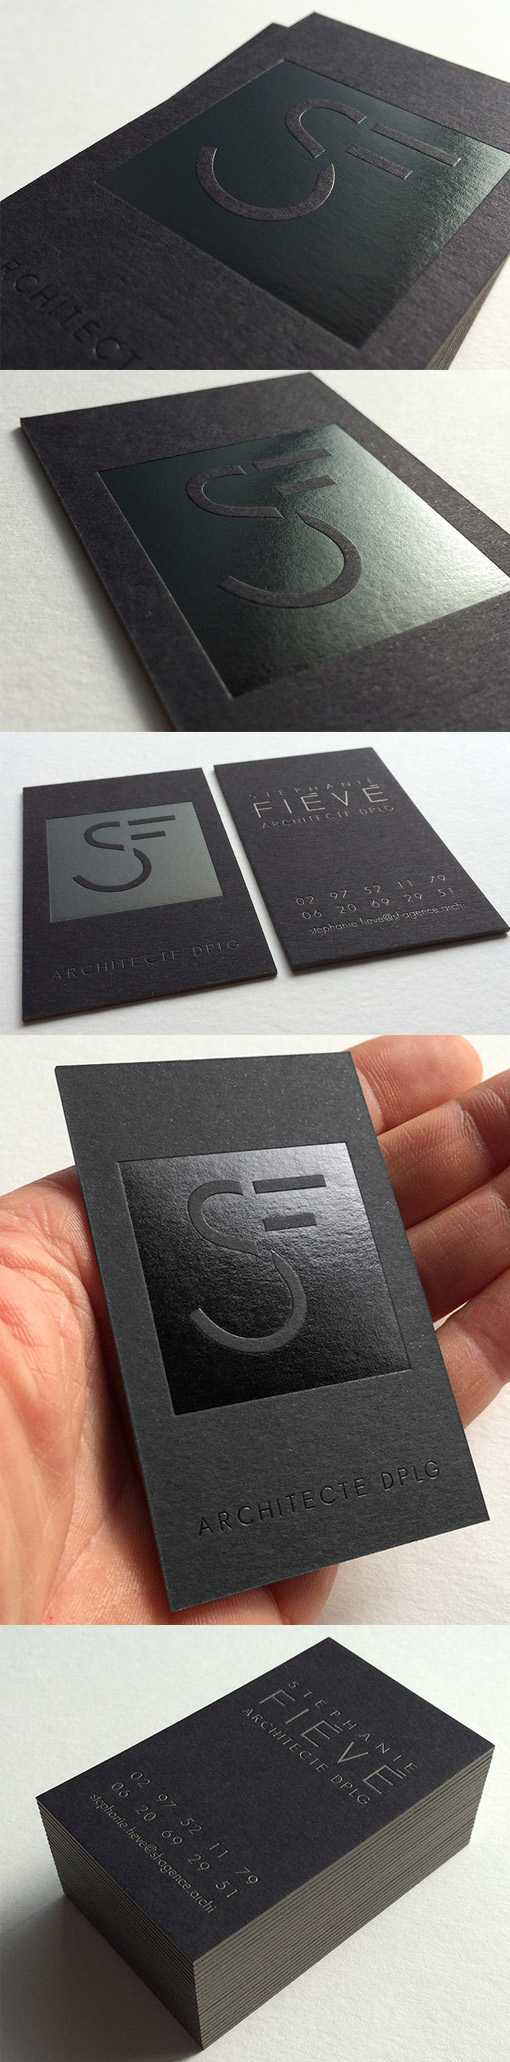 Clever Black On Black Business Card Design For An Architecture Firm